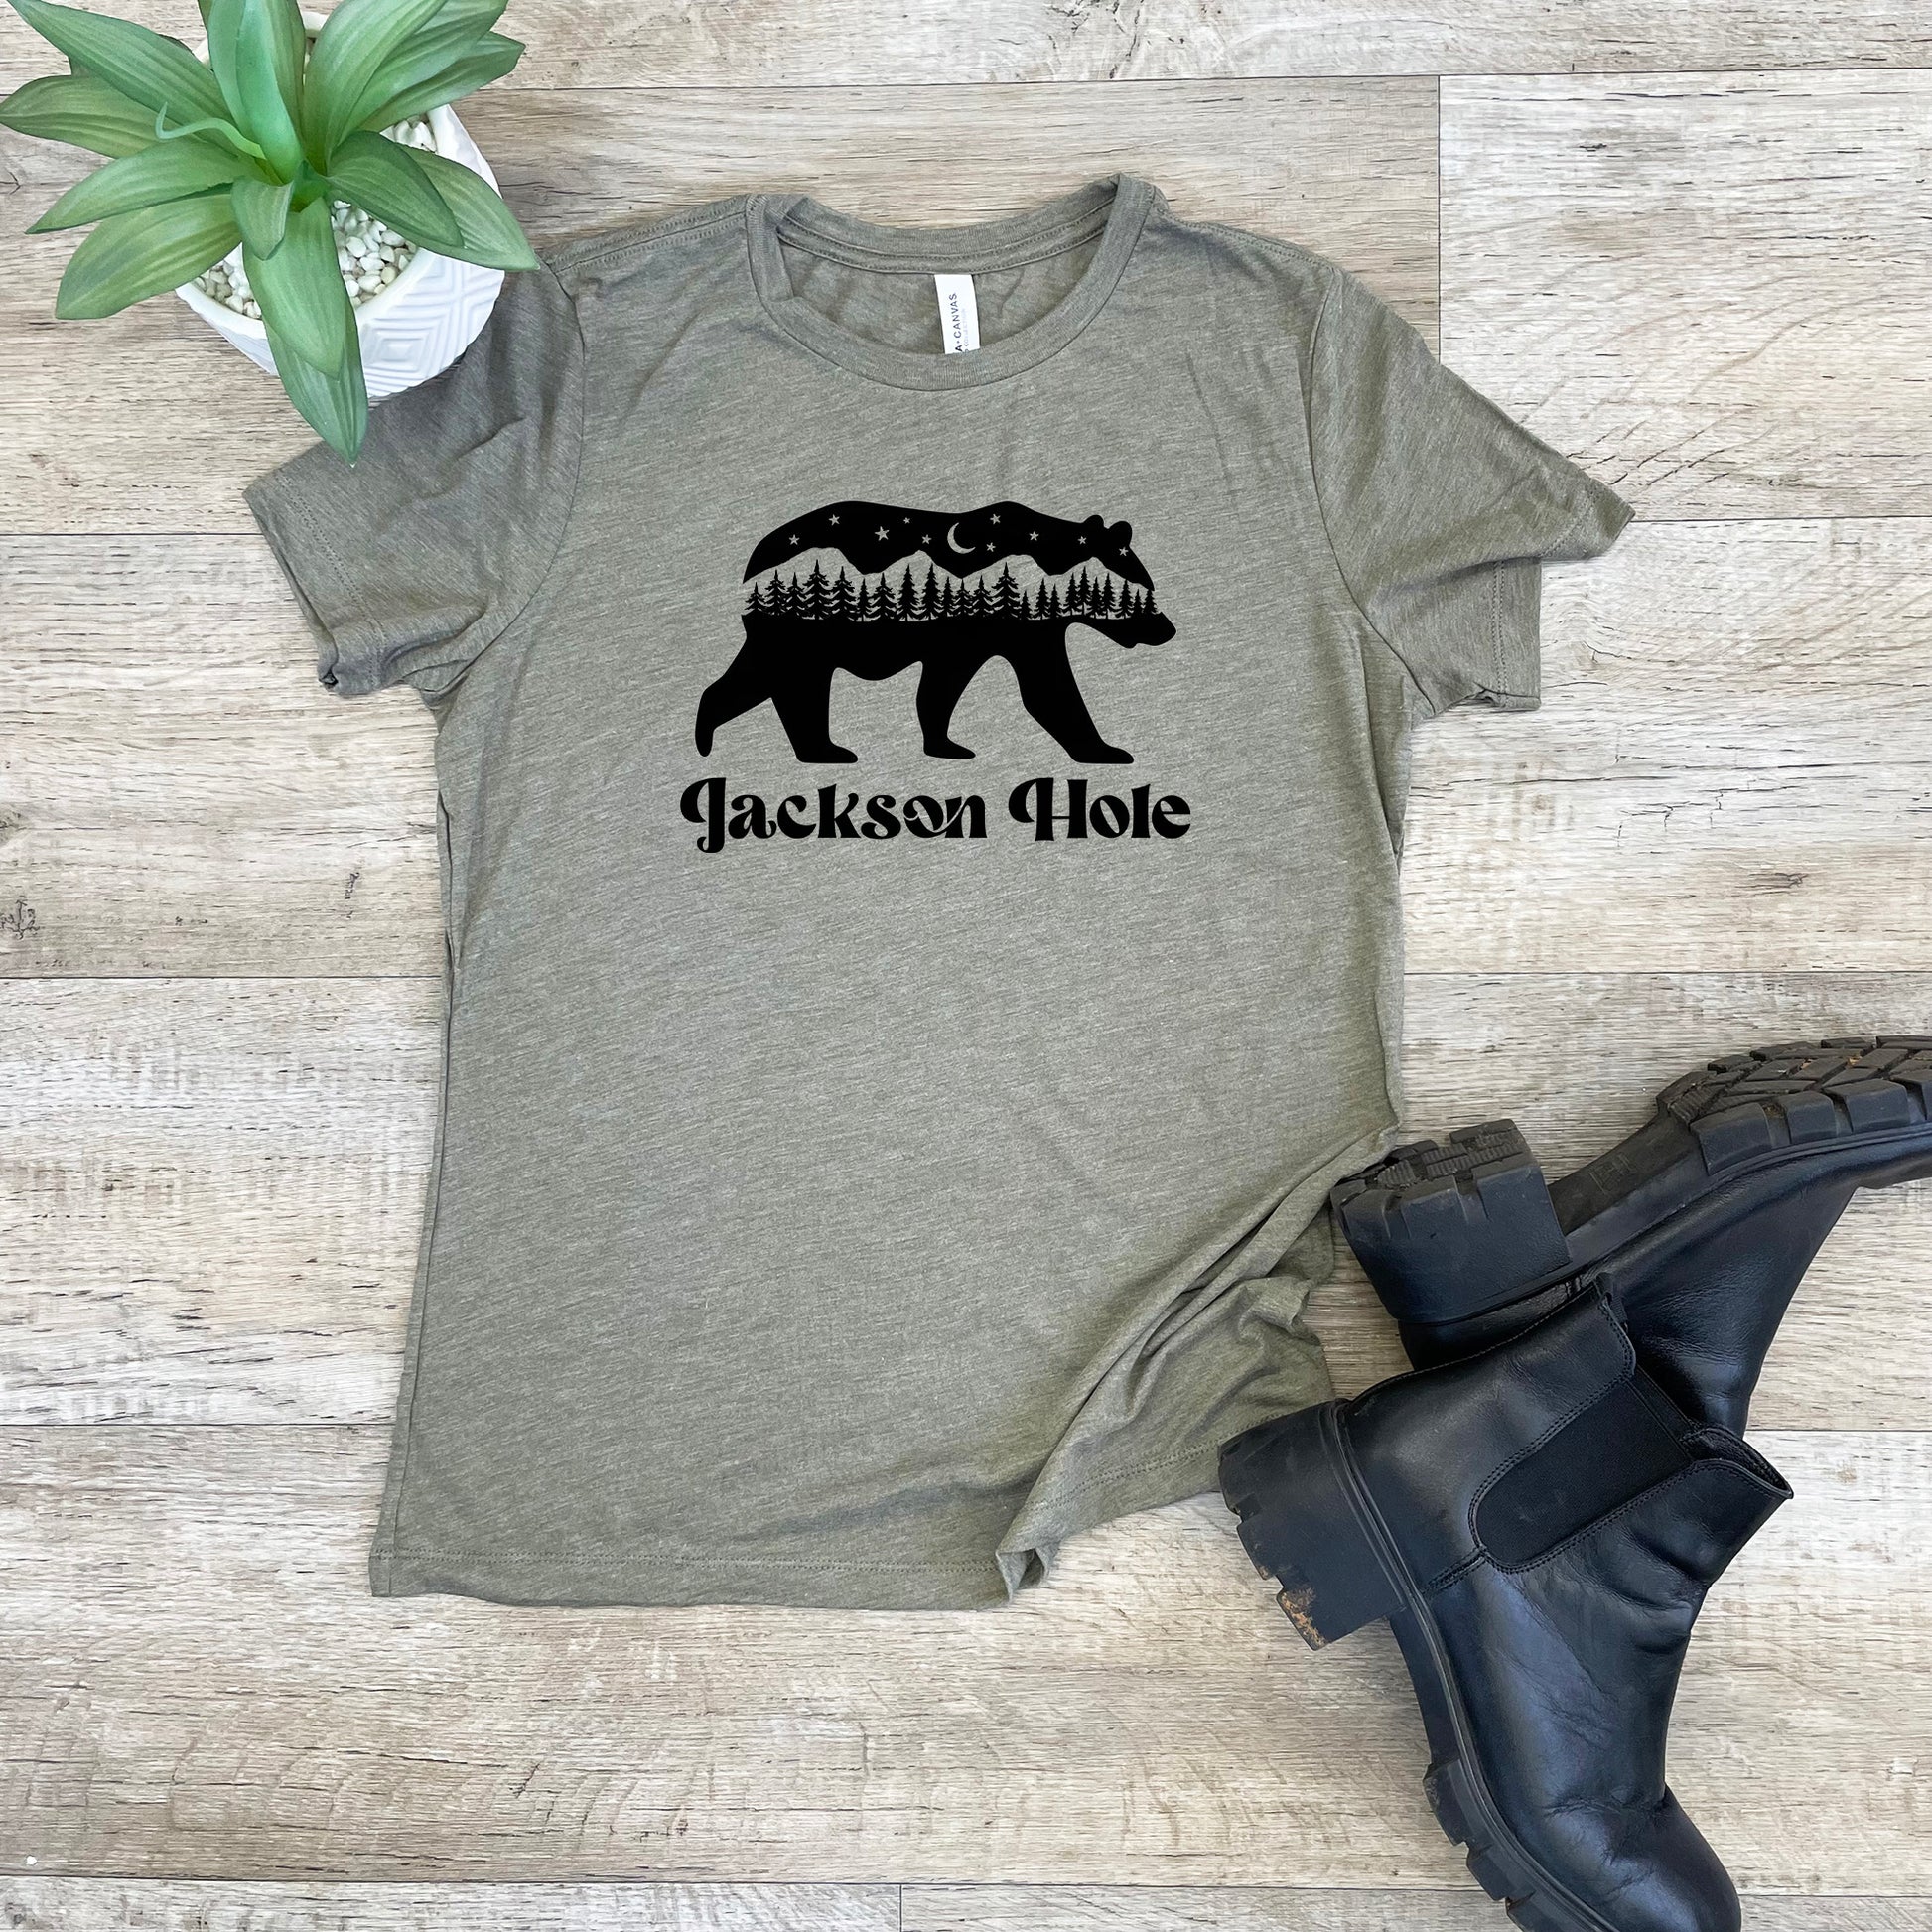 a t - shirt with a bear and trees on it